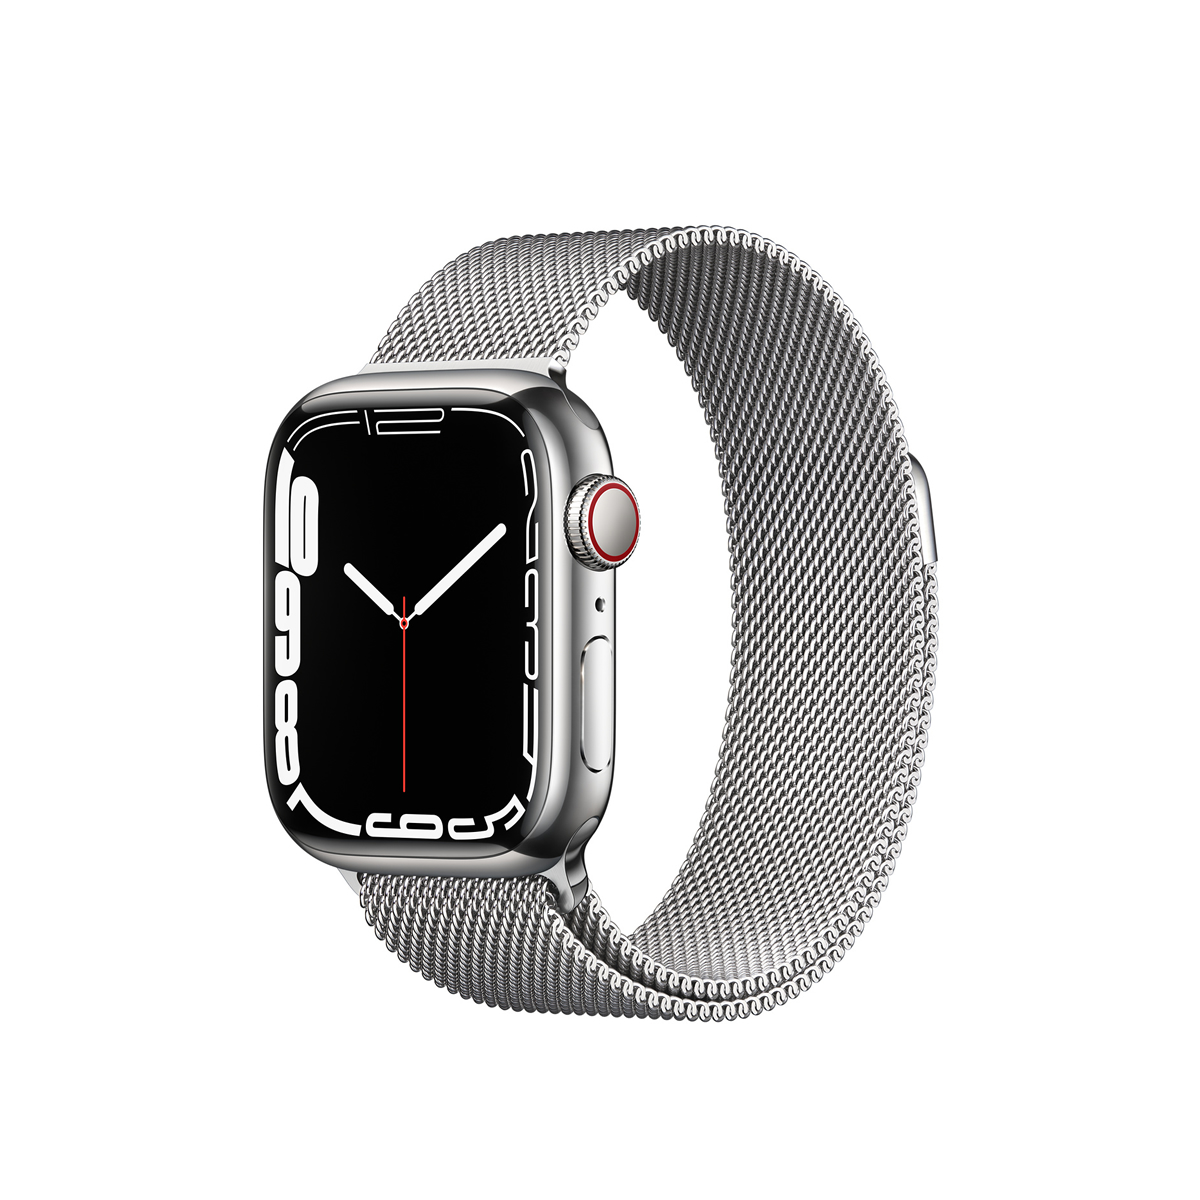 Apple Watch Series 7 GPS + Cellular, 41mm Silver Stainless Steel Case with Silver Milanese Loop